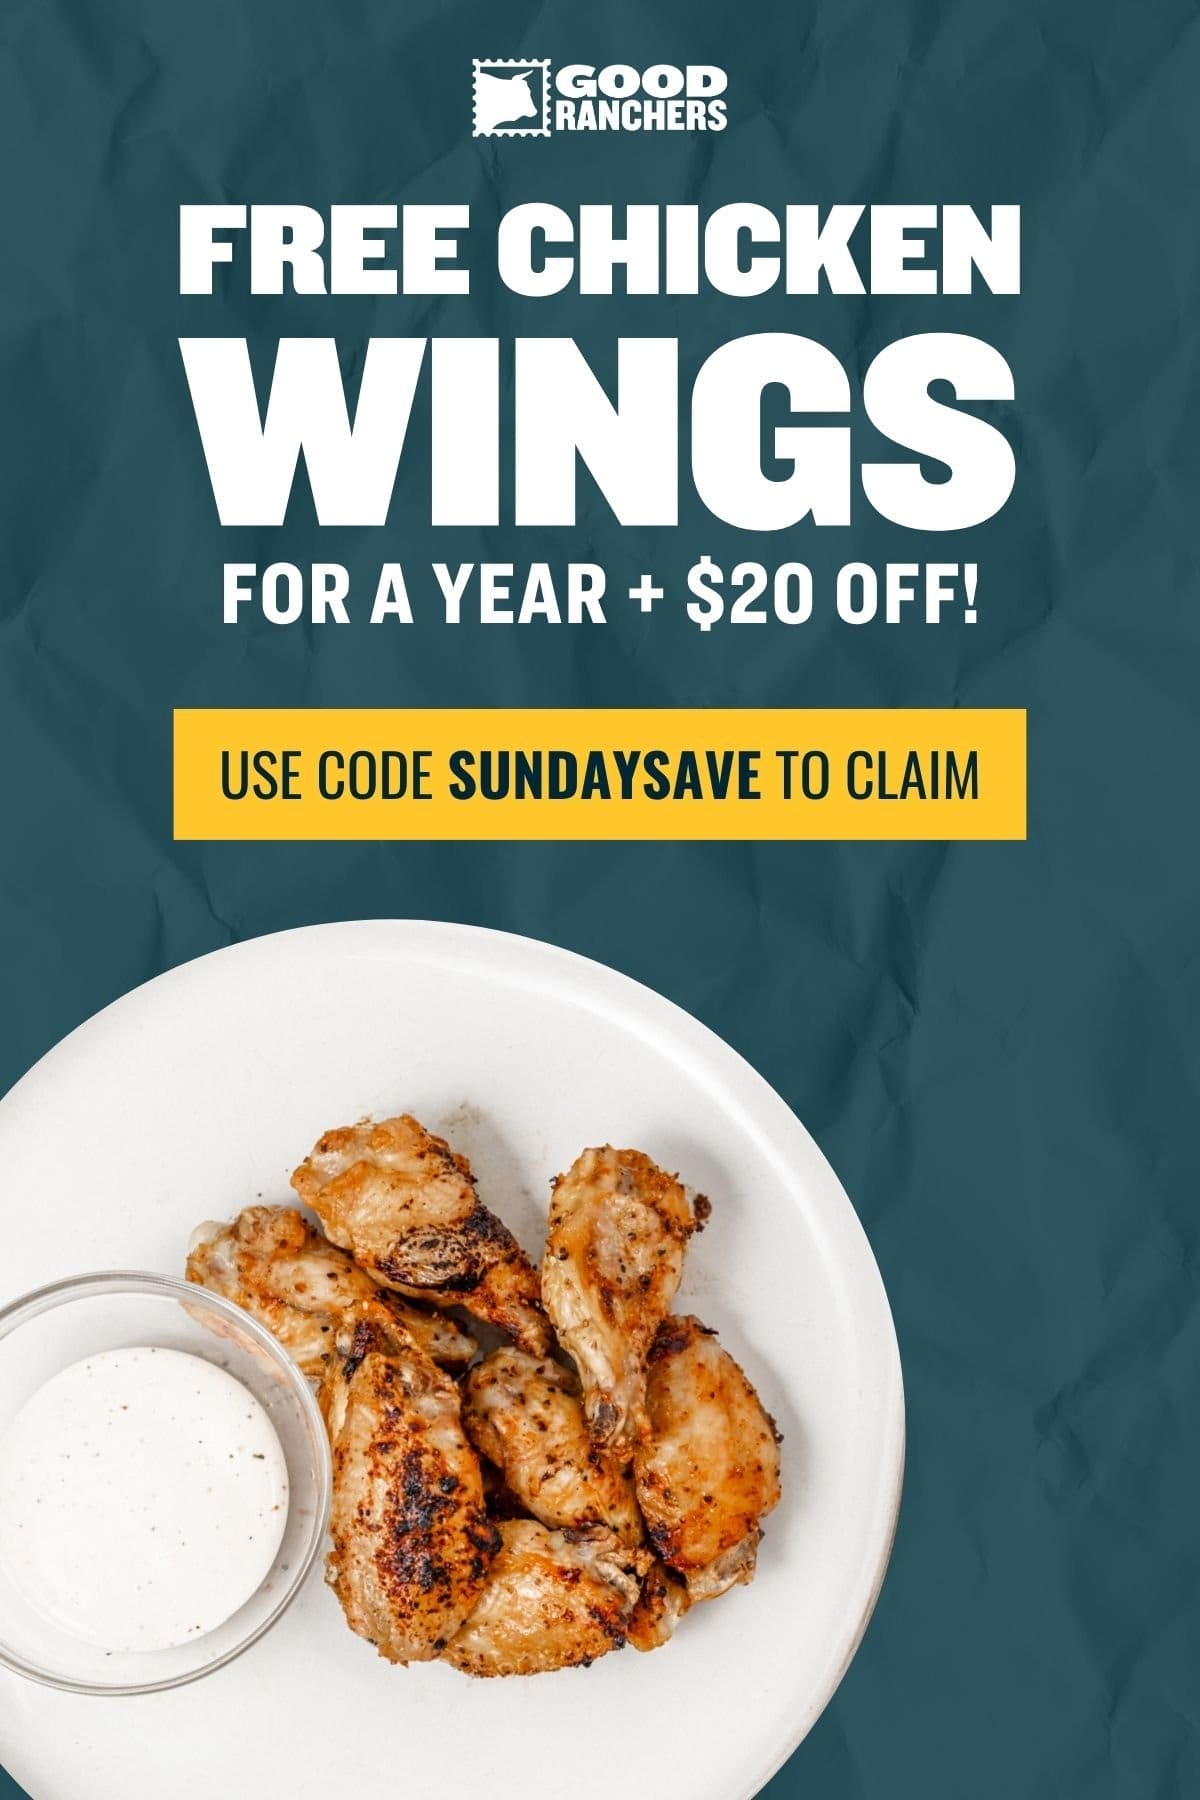 Subscribe and get \\$20 off + 2 lbs of Good Ranchers chicken wings for FREE for a year!